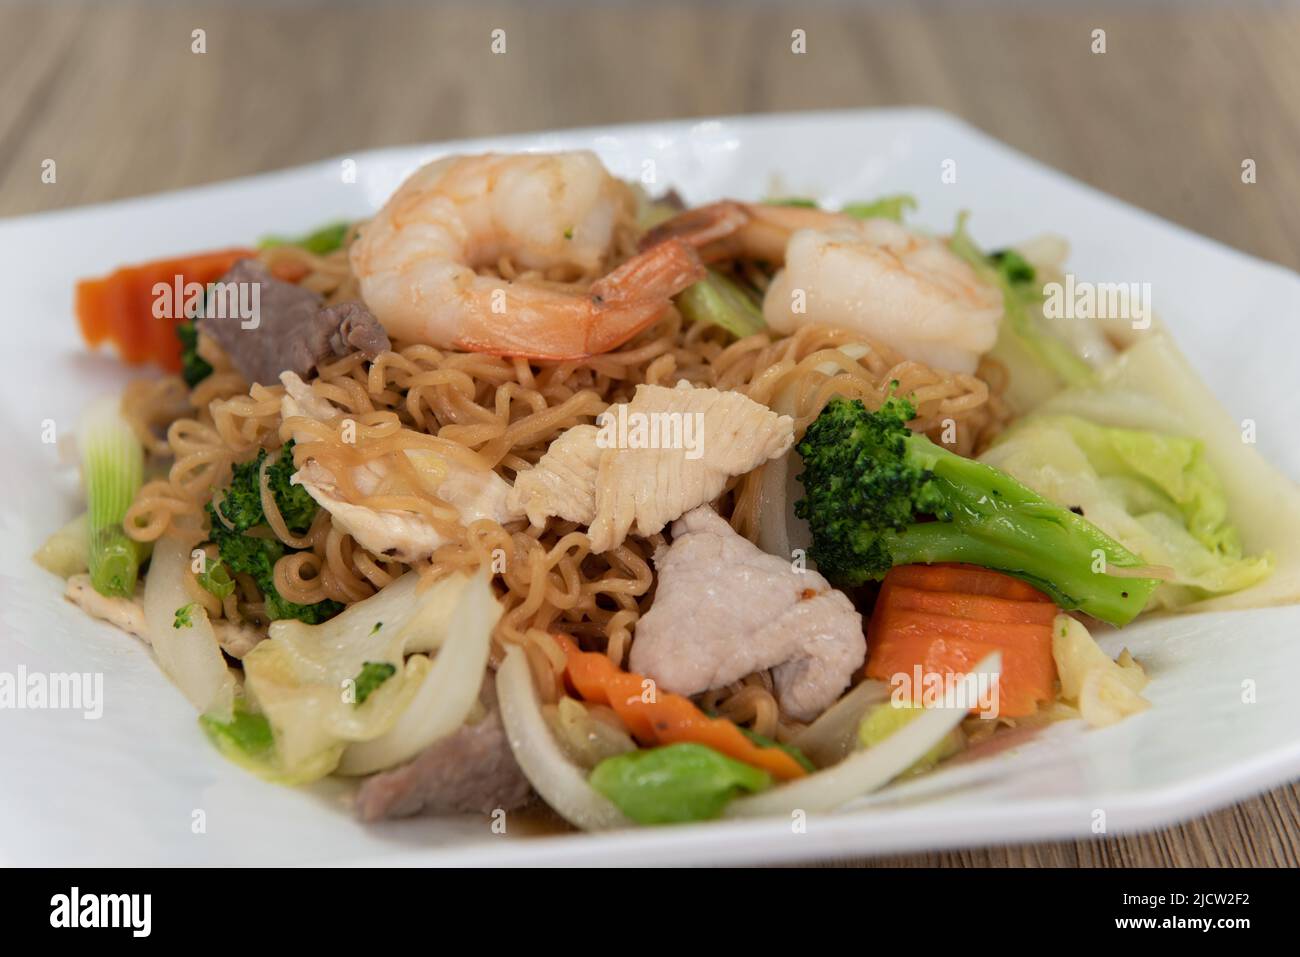 Hearty plate of chow mein topped with large shrimp, grilled vegetables and ready to eat. Stock Photo